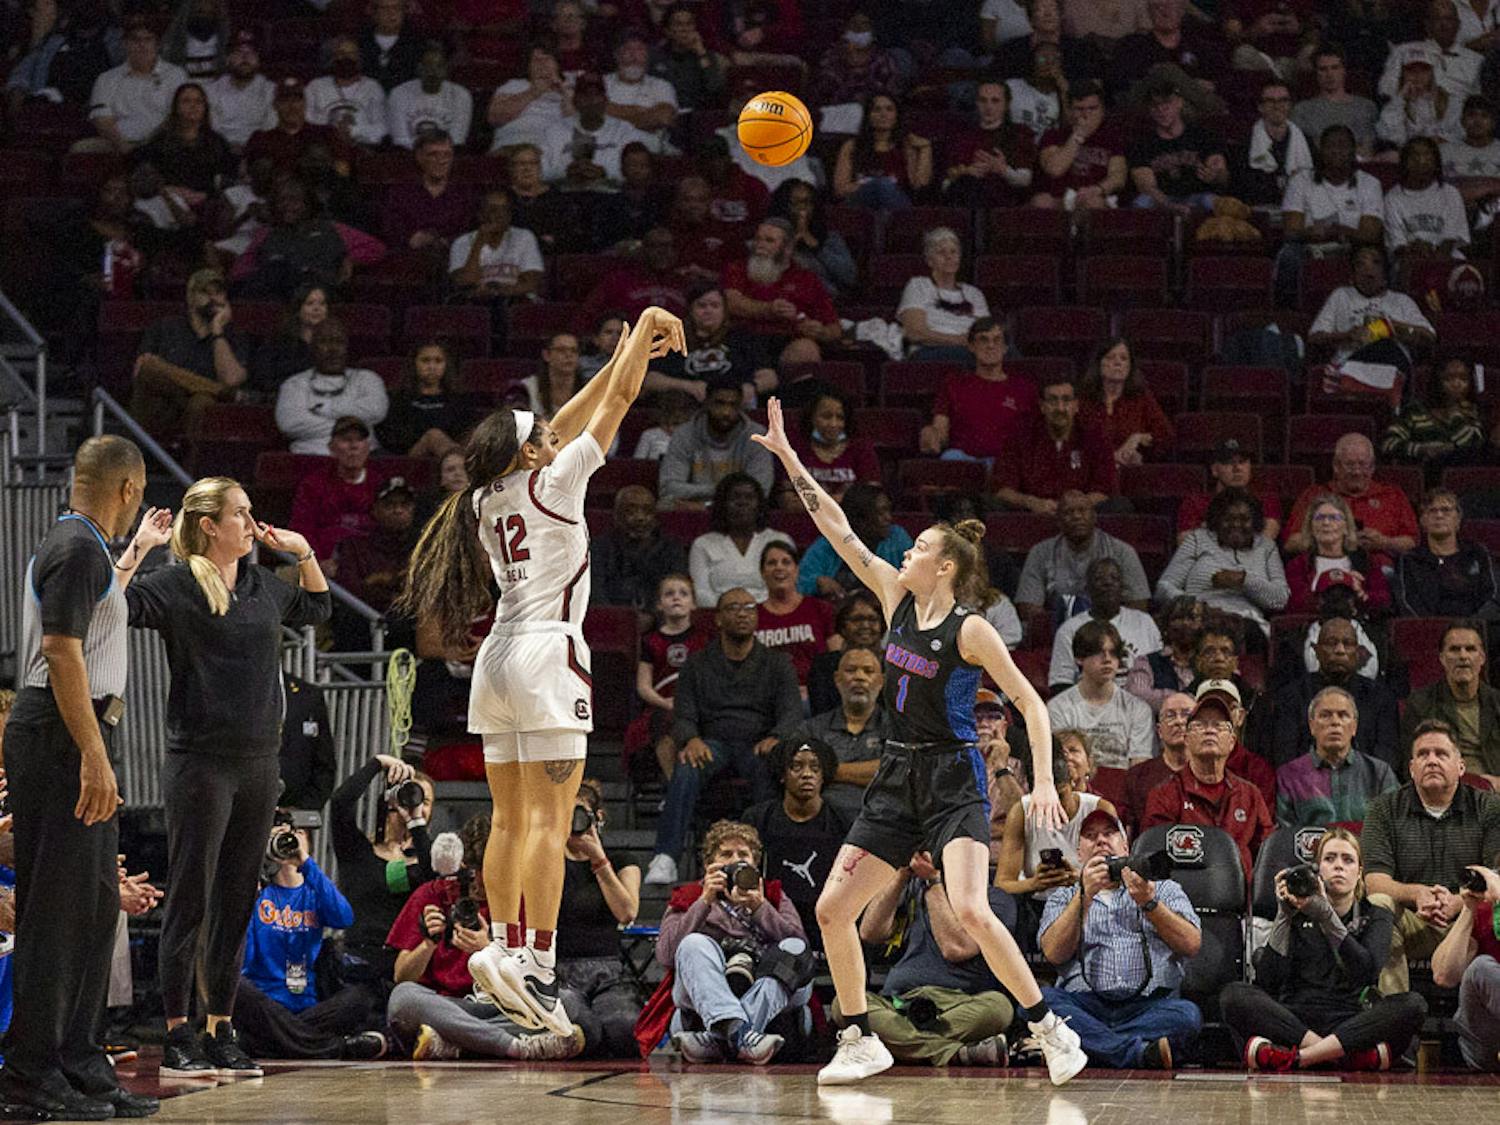 Senior guard Brea Beal scores a 3-pointer during the first quarter of the matchup between South Carolina and Florida at Colonial Life Arena on Feb. 16, 2023. The Gamecocks beat the Gators 87-56.&nbsp;